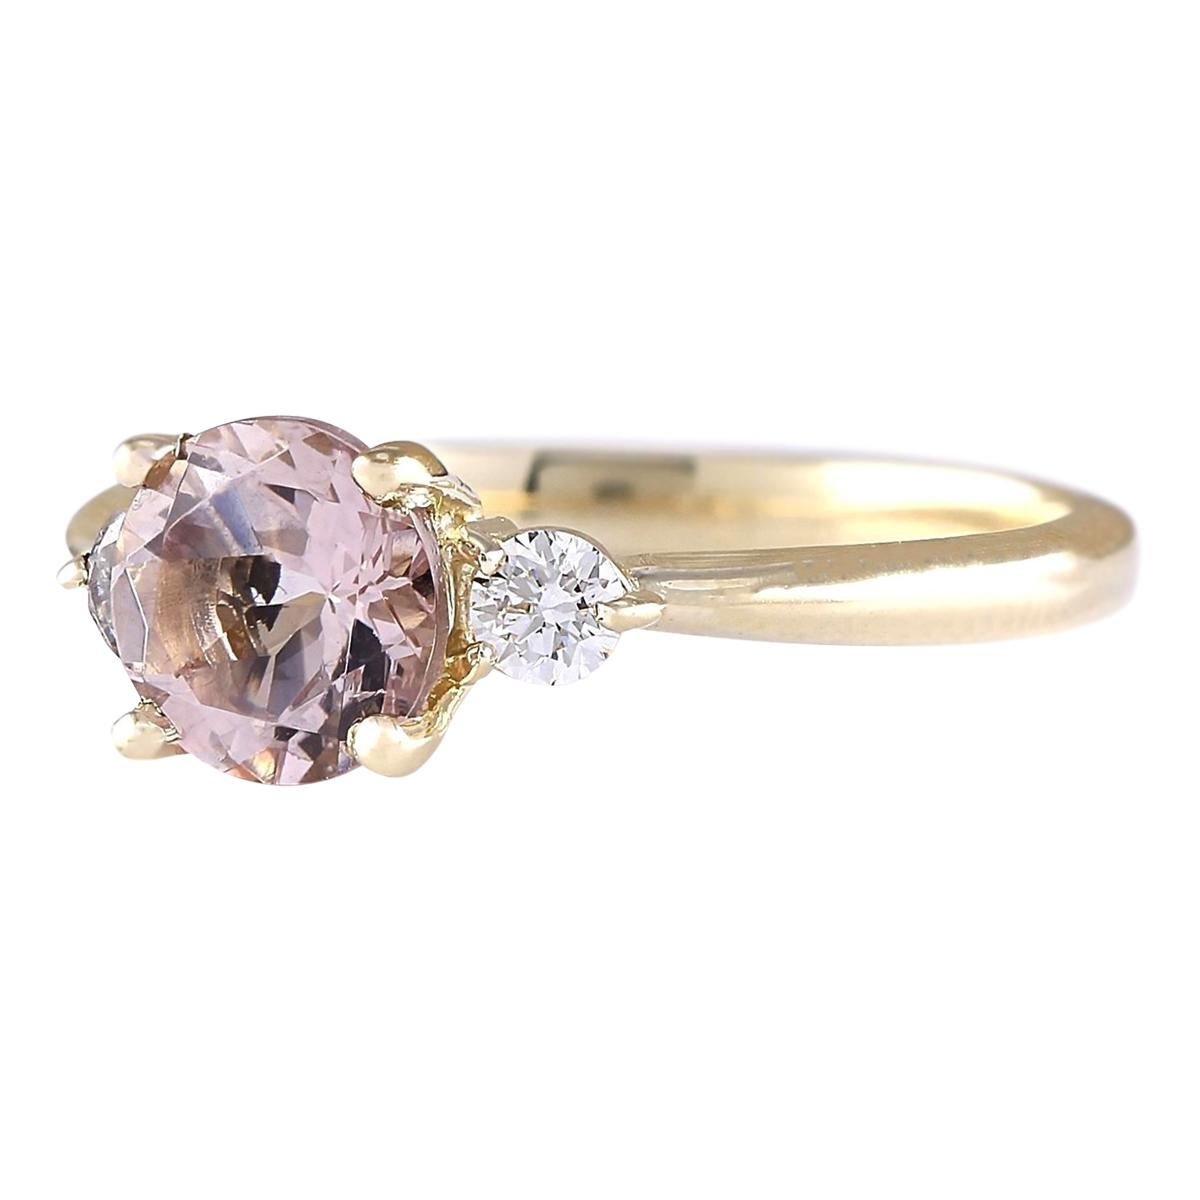 Stamped: 14K Yellow Gold
Total Ring Weight: 2.2 Grams
Total Natural Morganite Weight is 1.00 Carat (Measures: 6.50x6.50 mm)
Color: Peach
Total Natural Diamond Weight is 0.20 Carat
Color: F-G, Clarity: VS2-SI1
Face Measures: 6.50x11.80 mm
Sku: